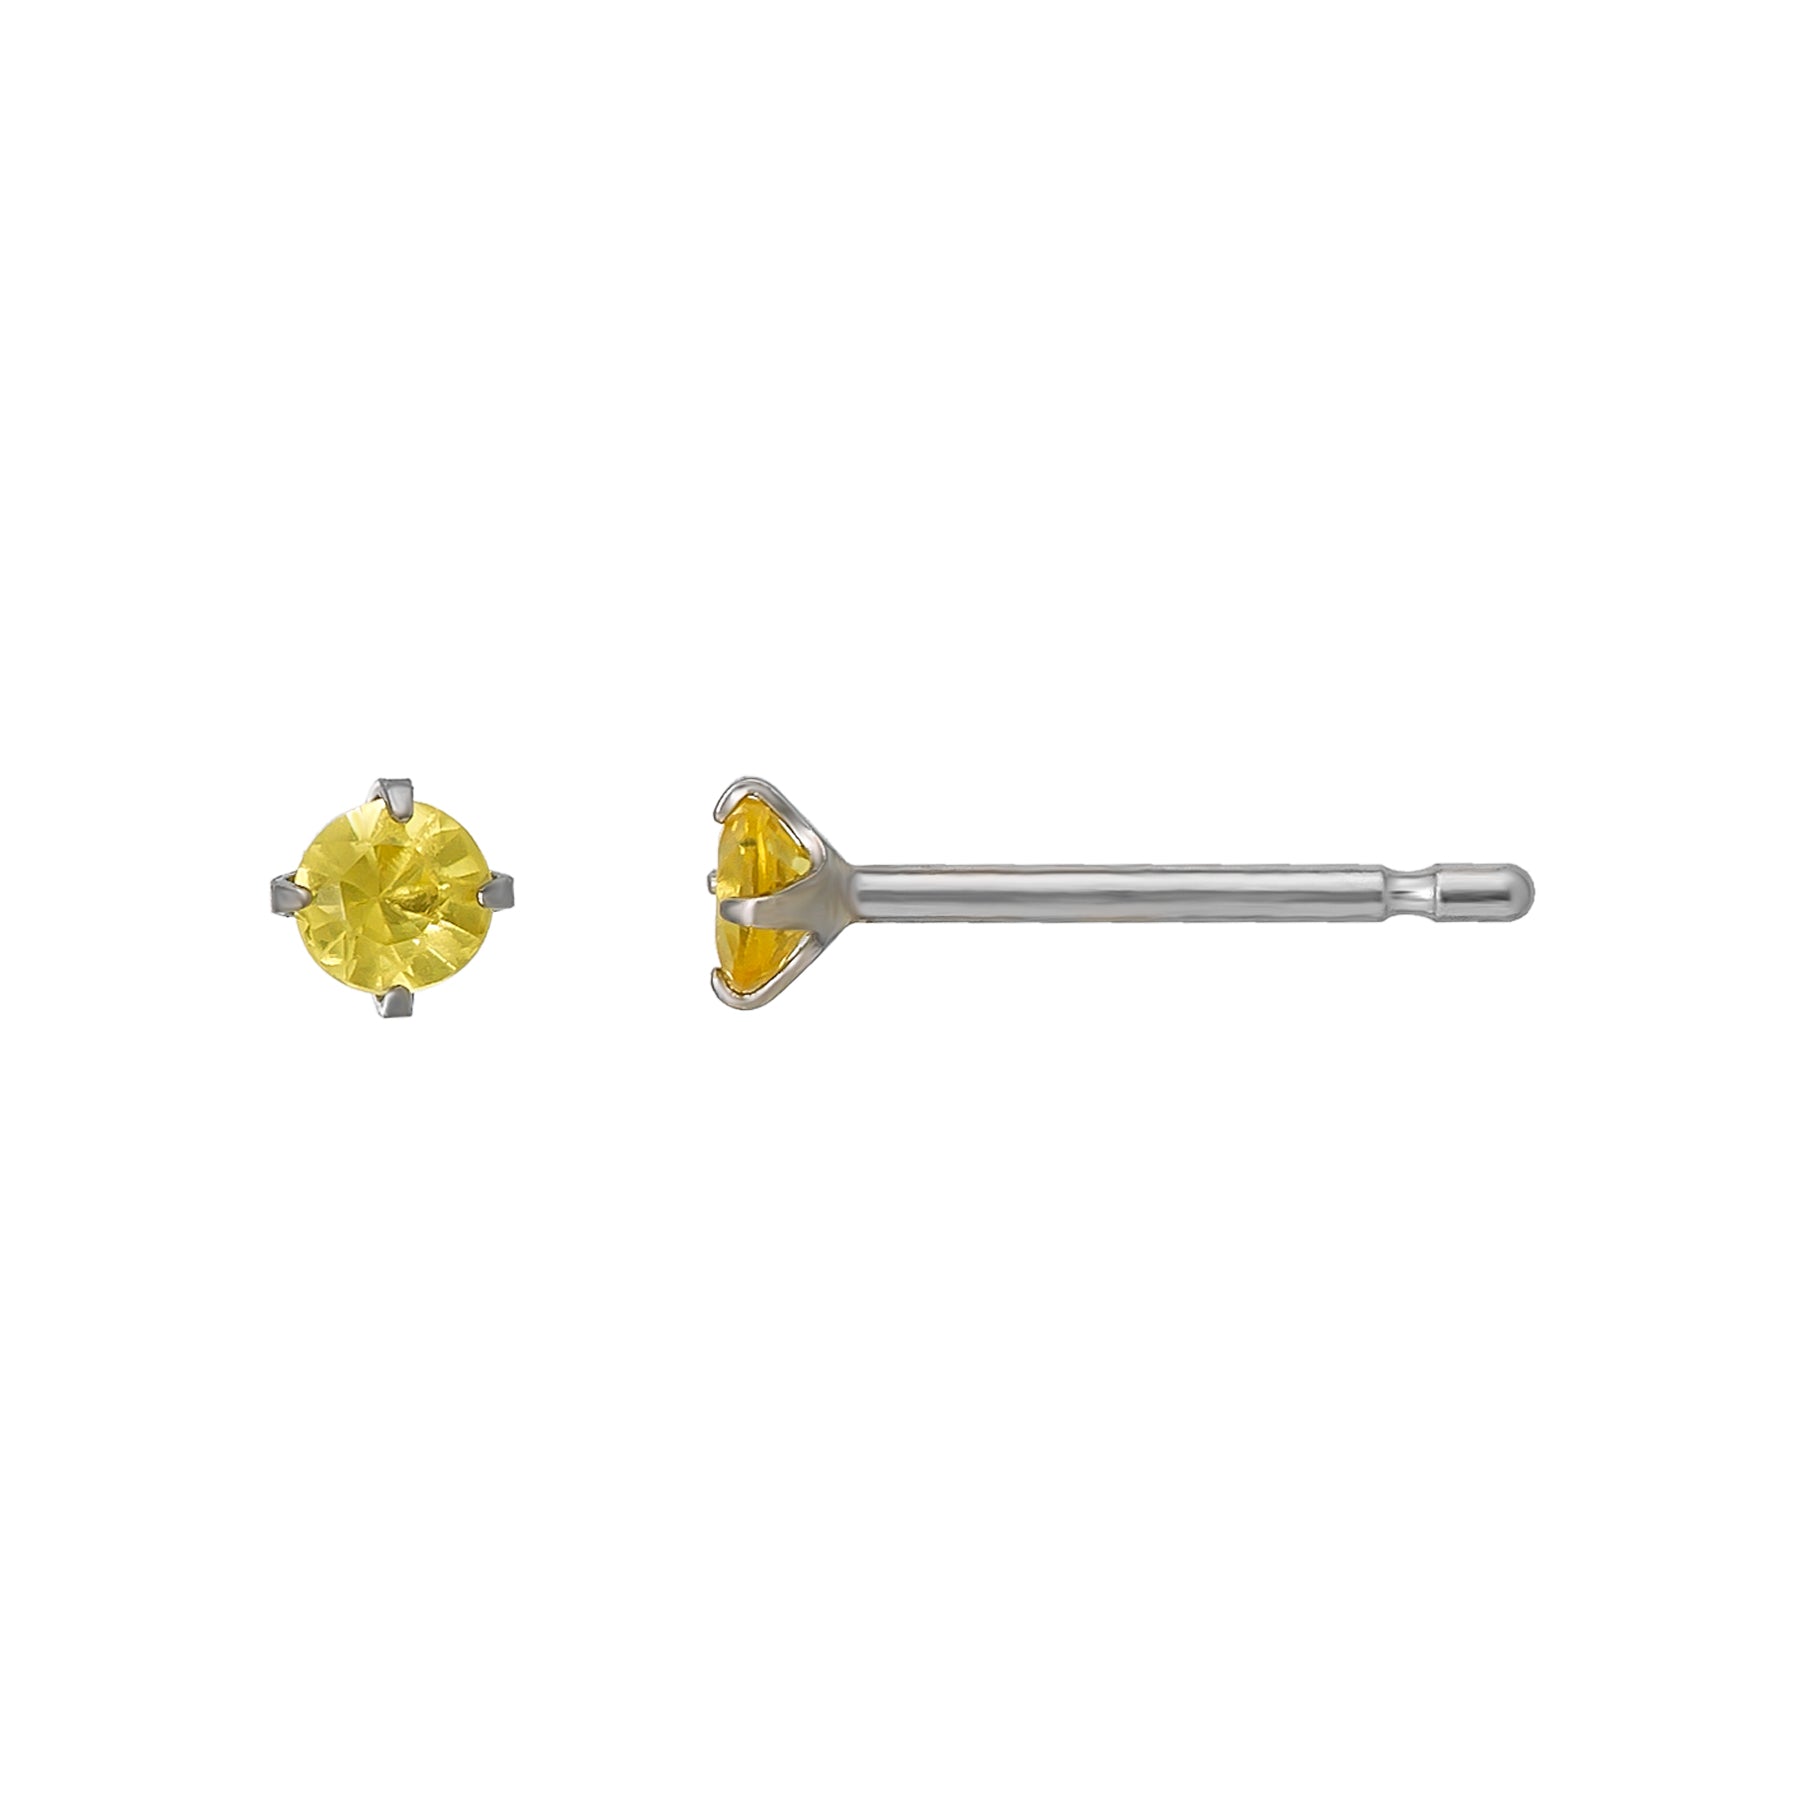 [Second Earrings] Platinum Yellow Sapphire Earrings - Product Image